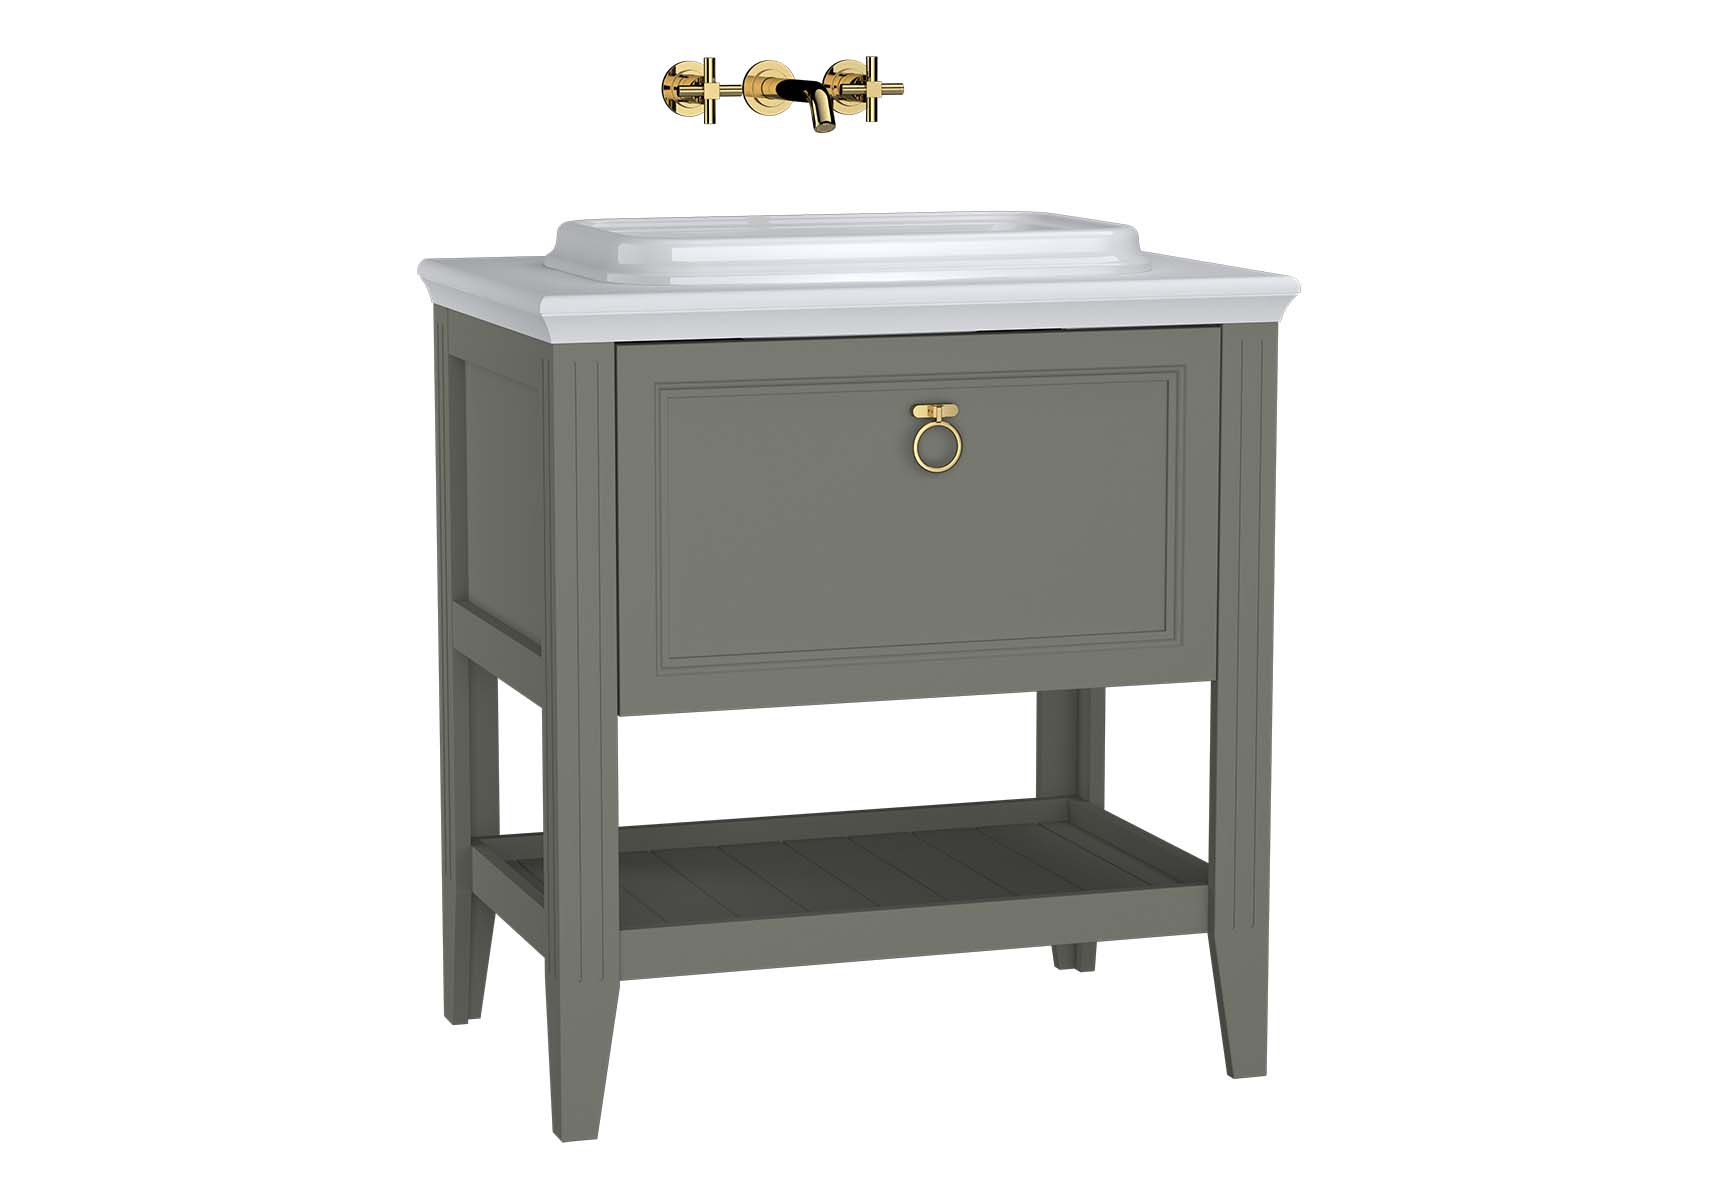 Valarte Washbasin Unit, 80 cm, with drawers, with countertop washbasin, Matte Grey